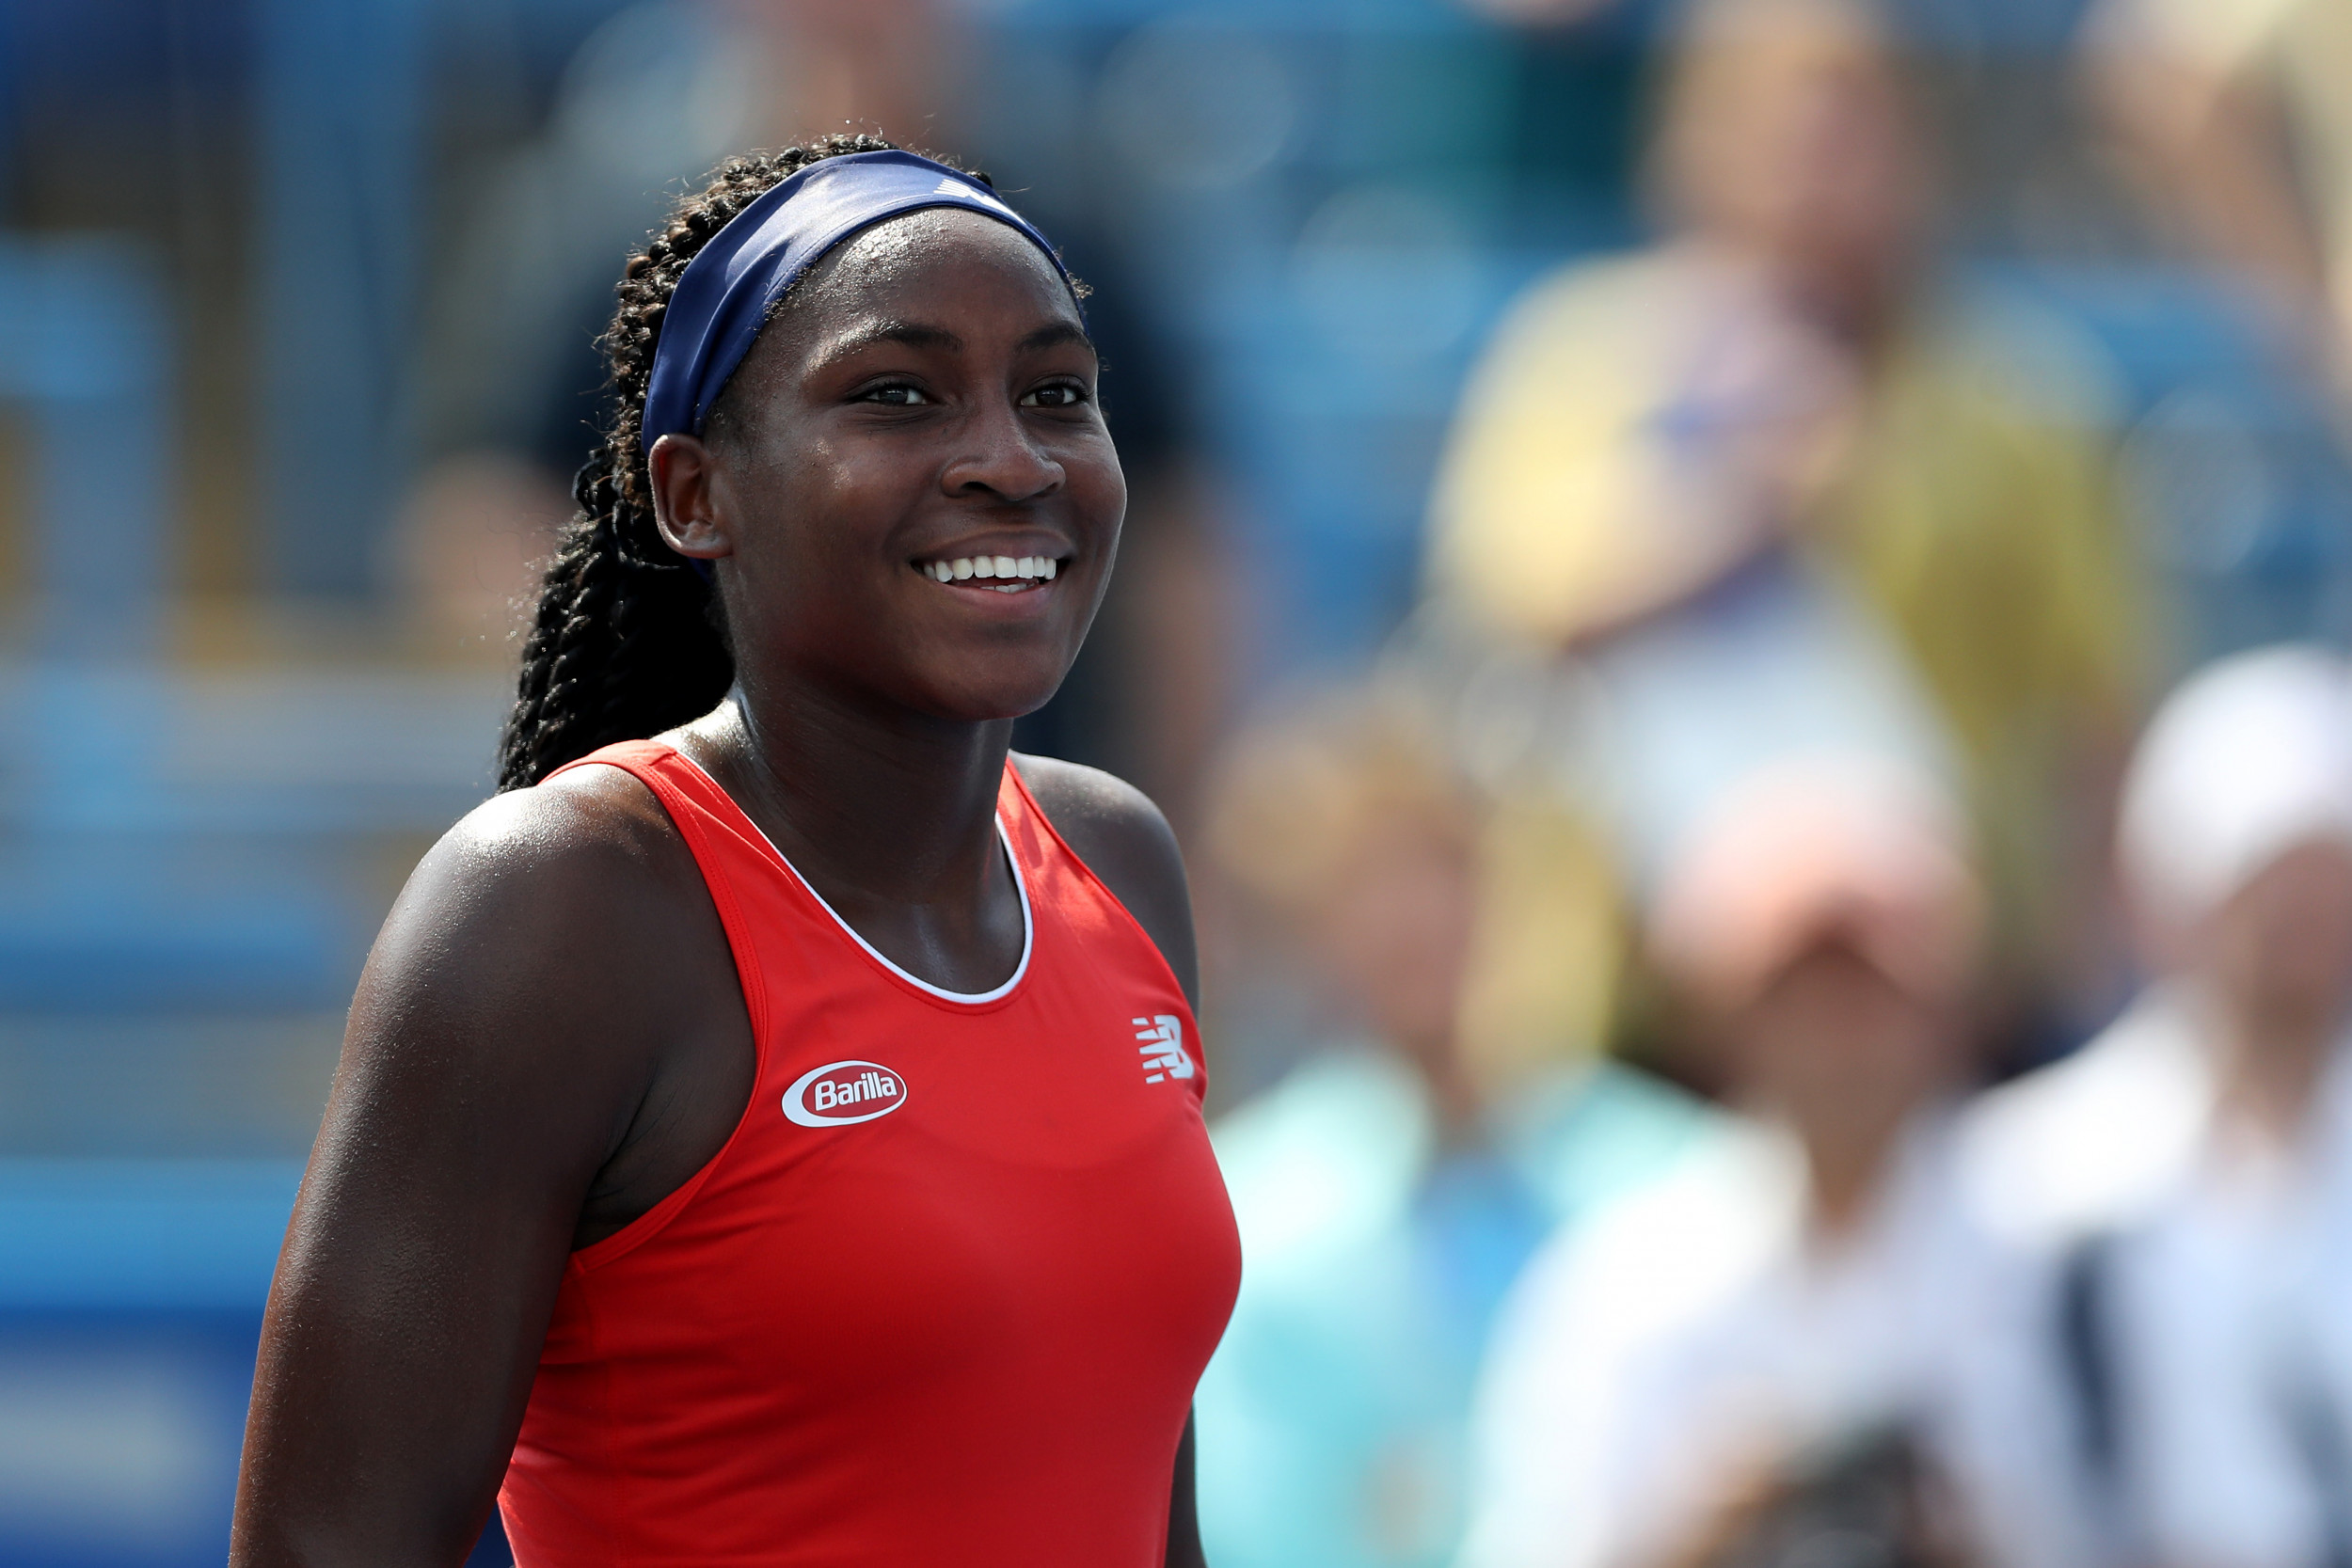 Citi Open Tennis 2019 How to Watch Coco Gauff Round of 32 Match, Start Time, Live Stream and Odds